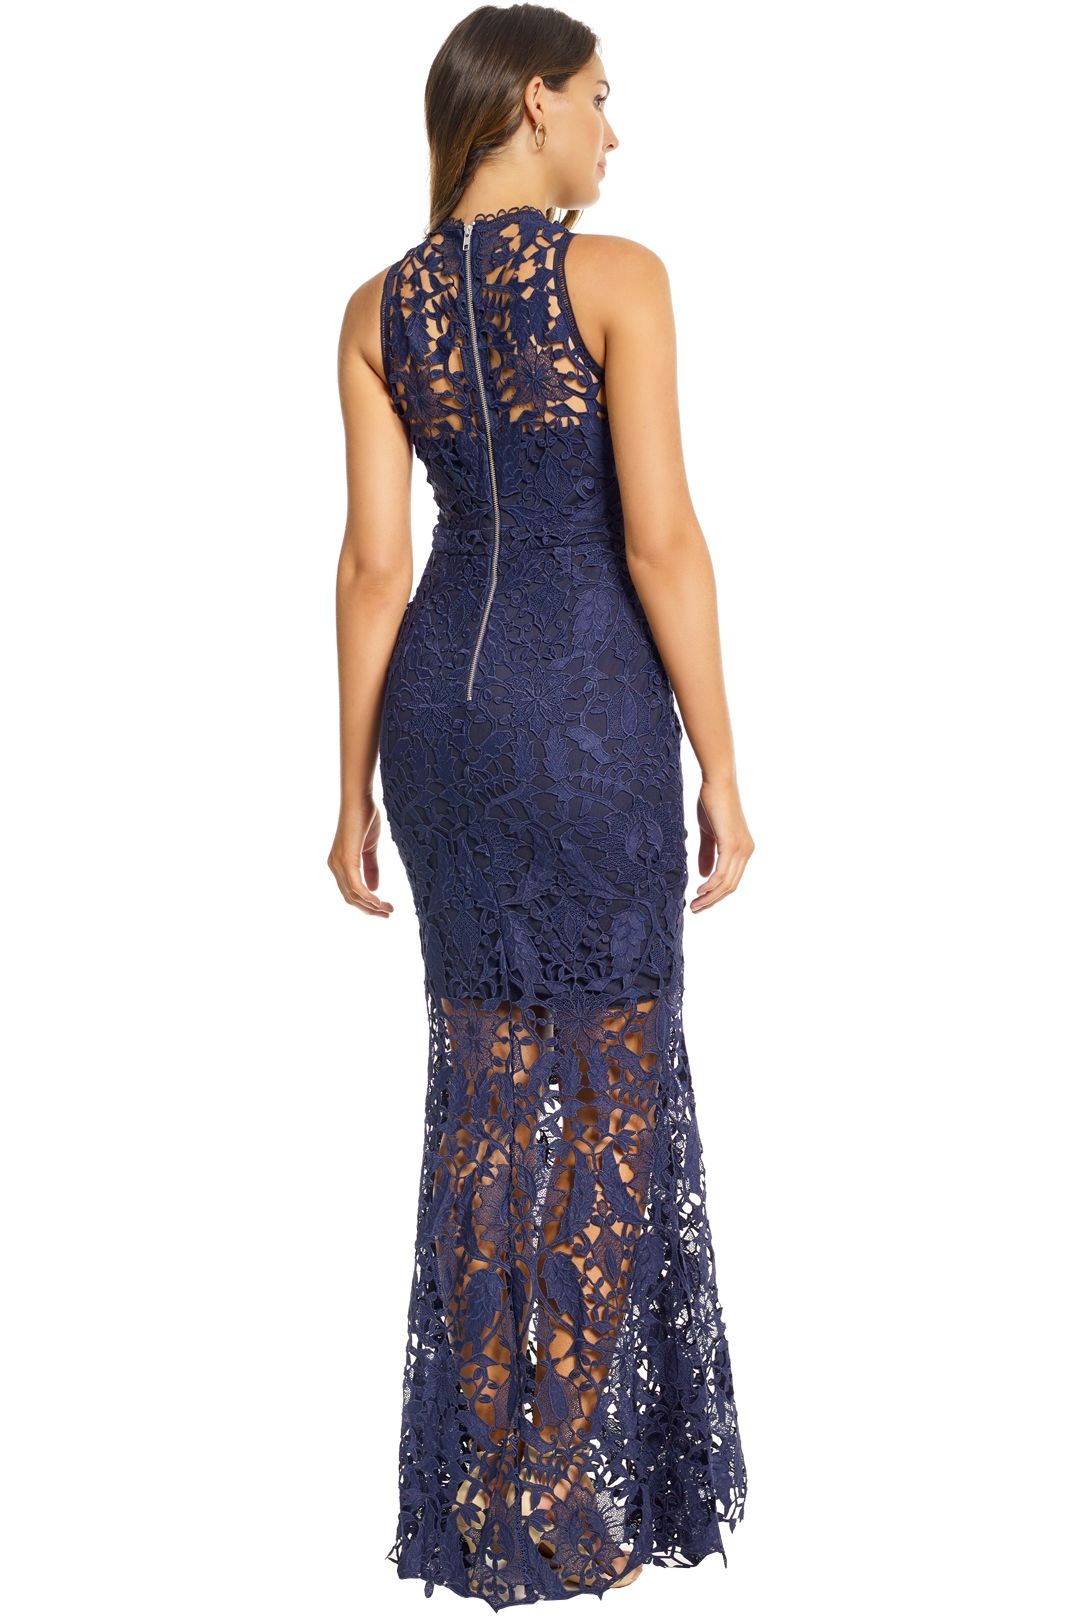 Grace and Hart - Prosecco Gown - Navy - Back